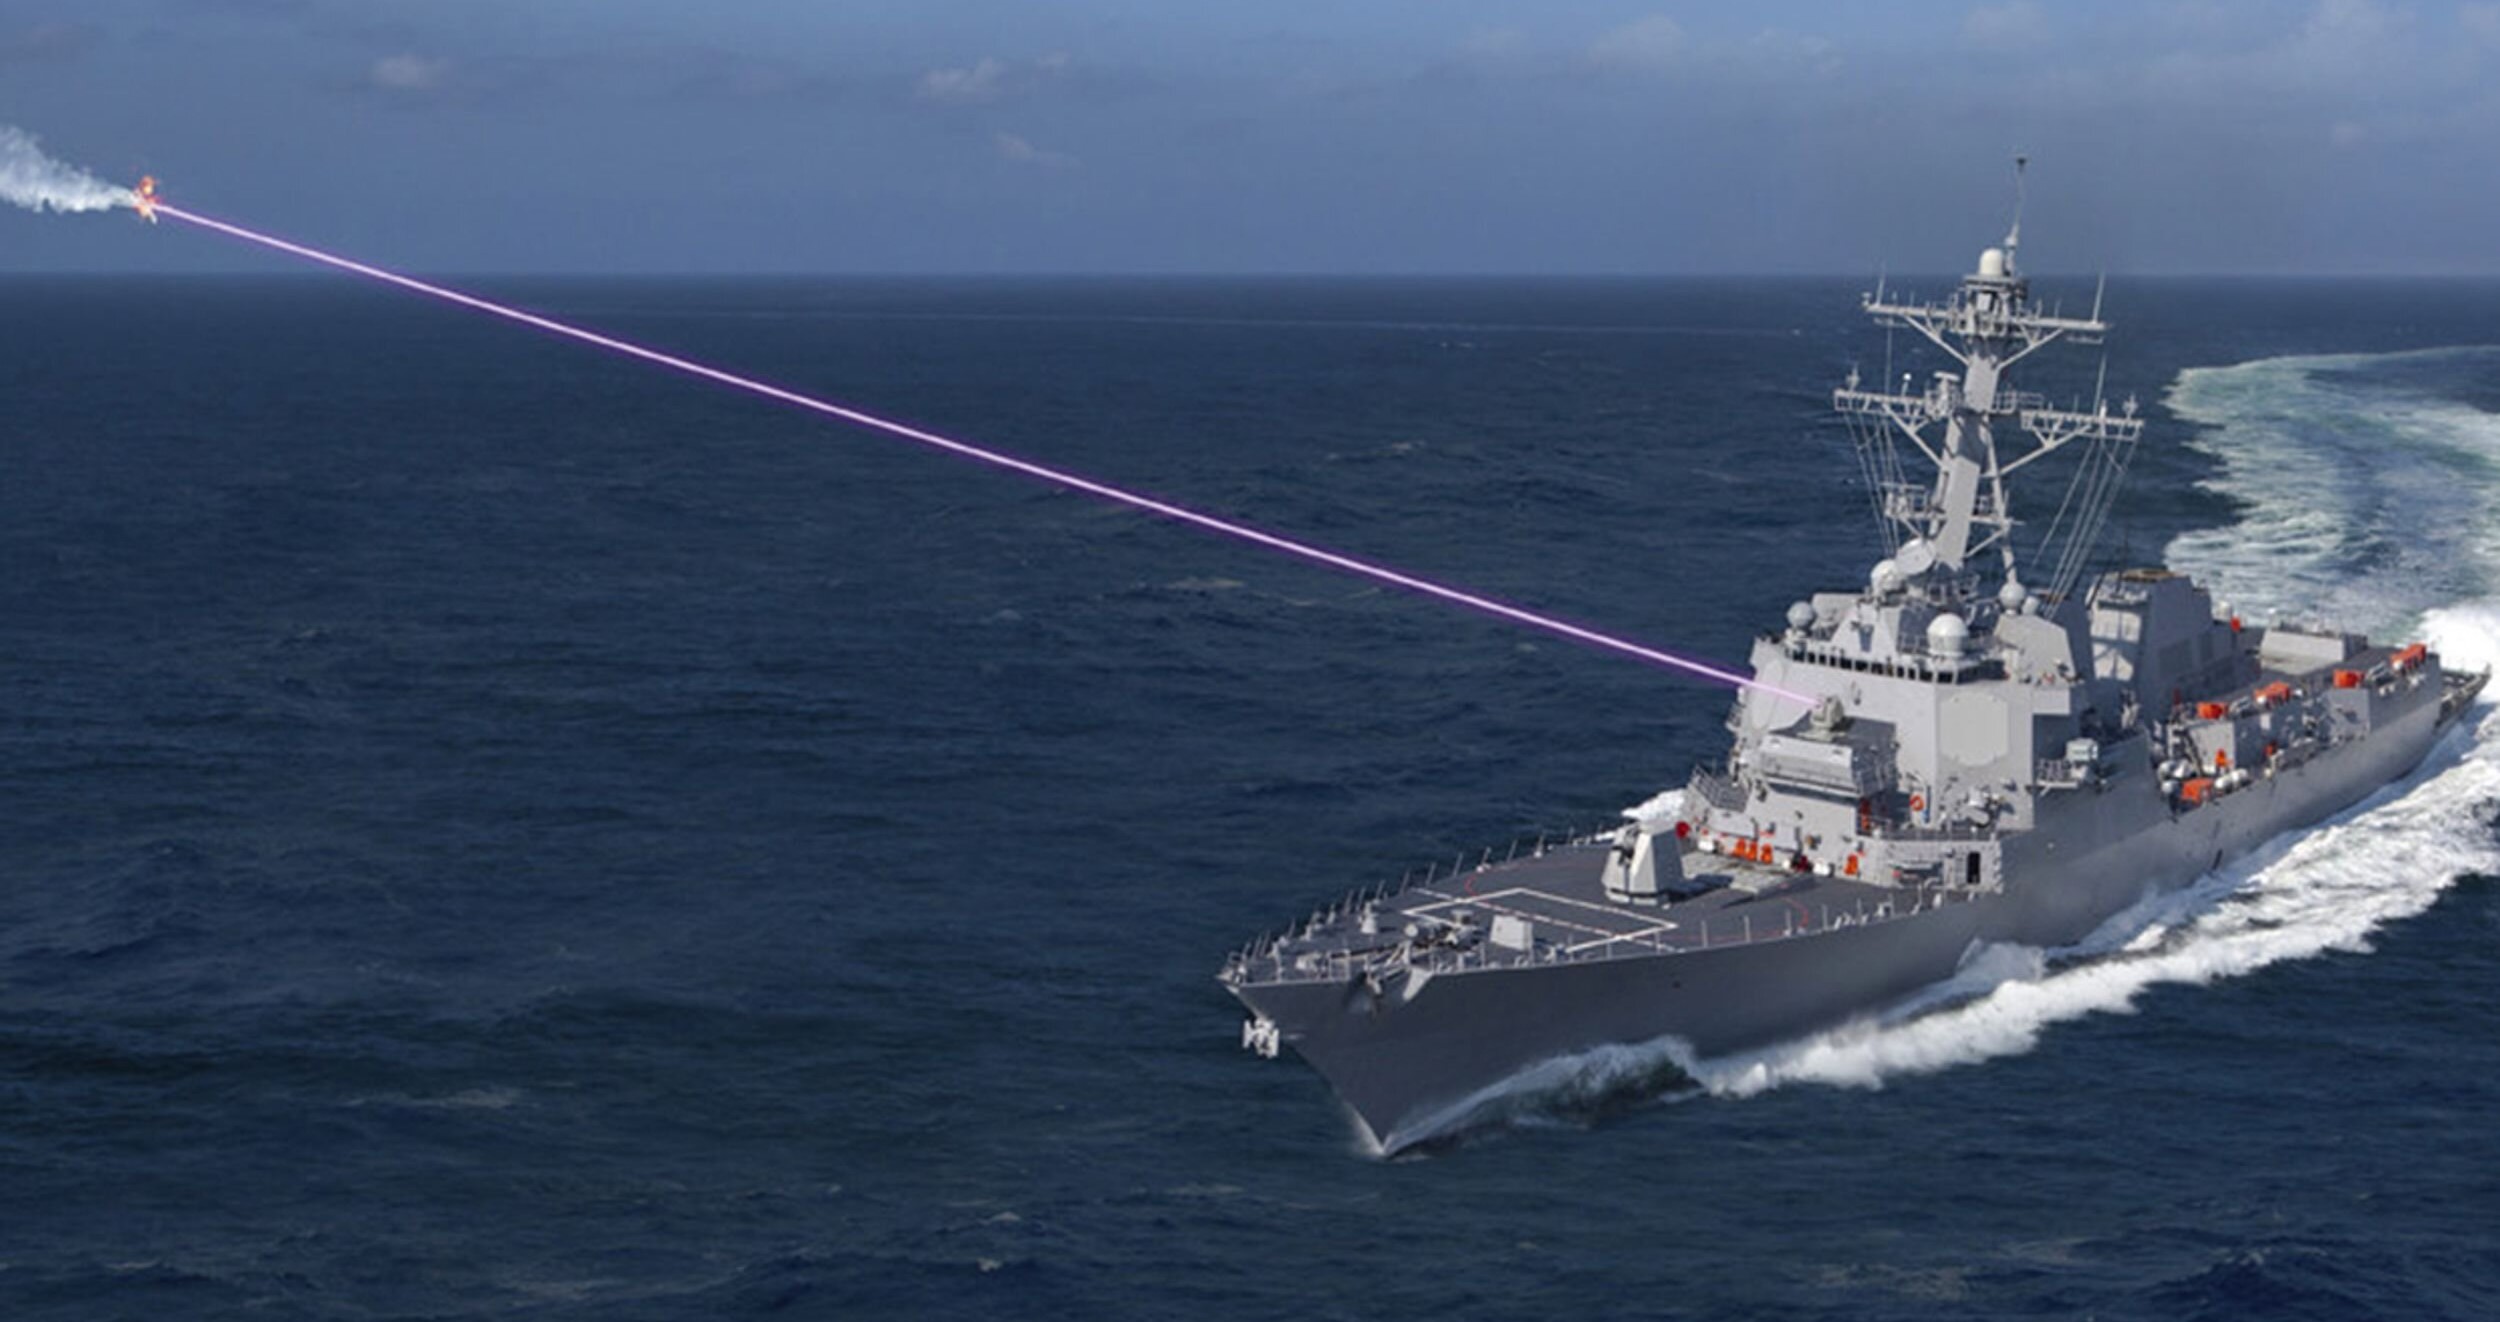 Artist's impression of the laser weapon used by the US Navy. Credit: Lockheed Martin